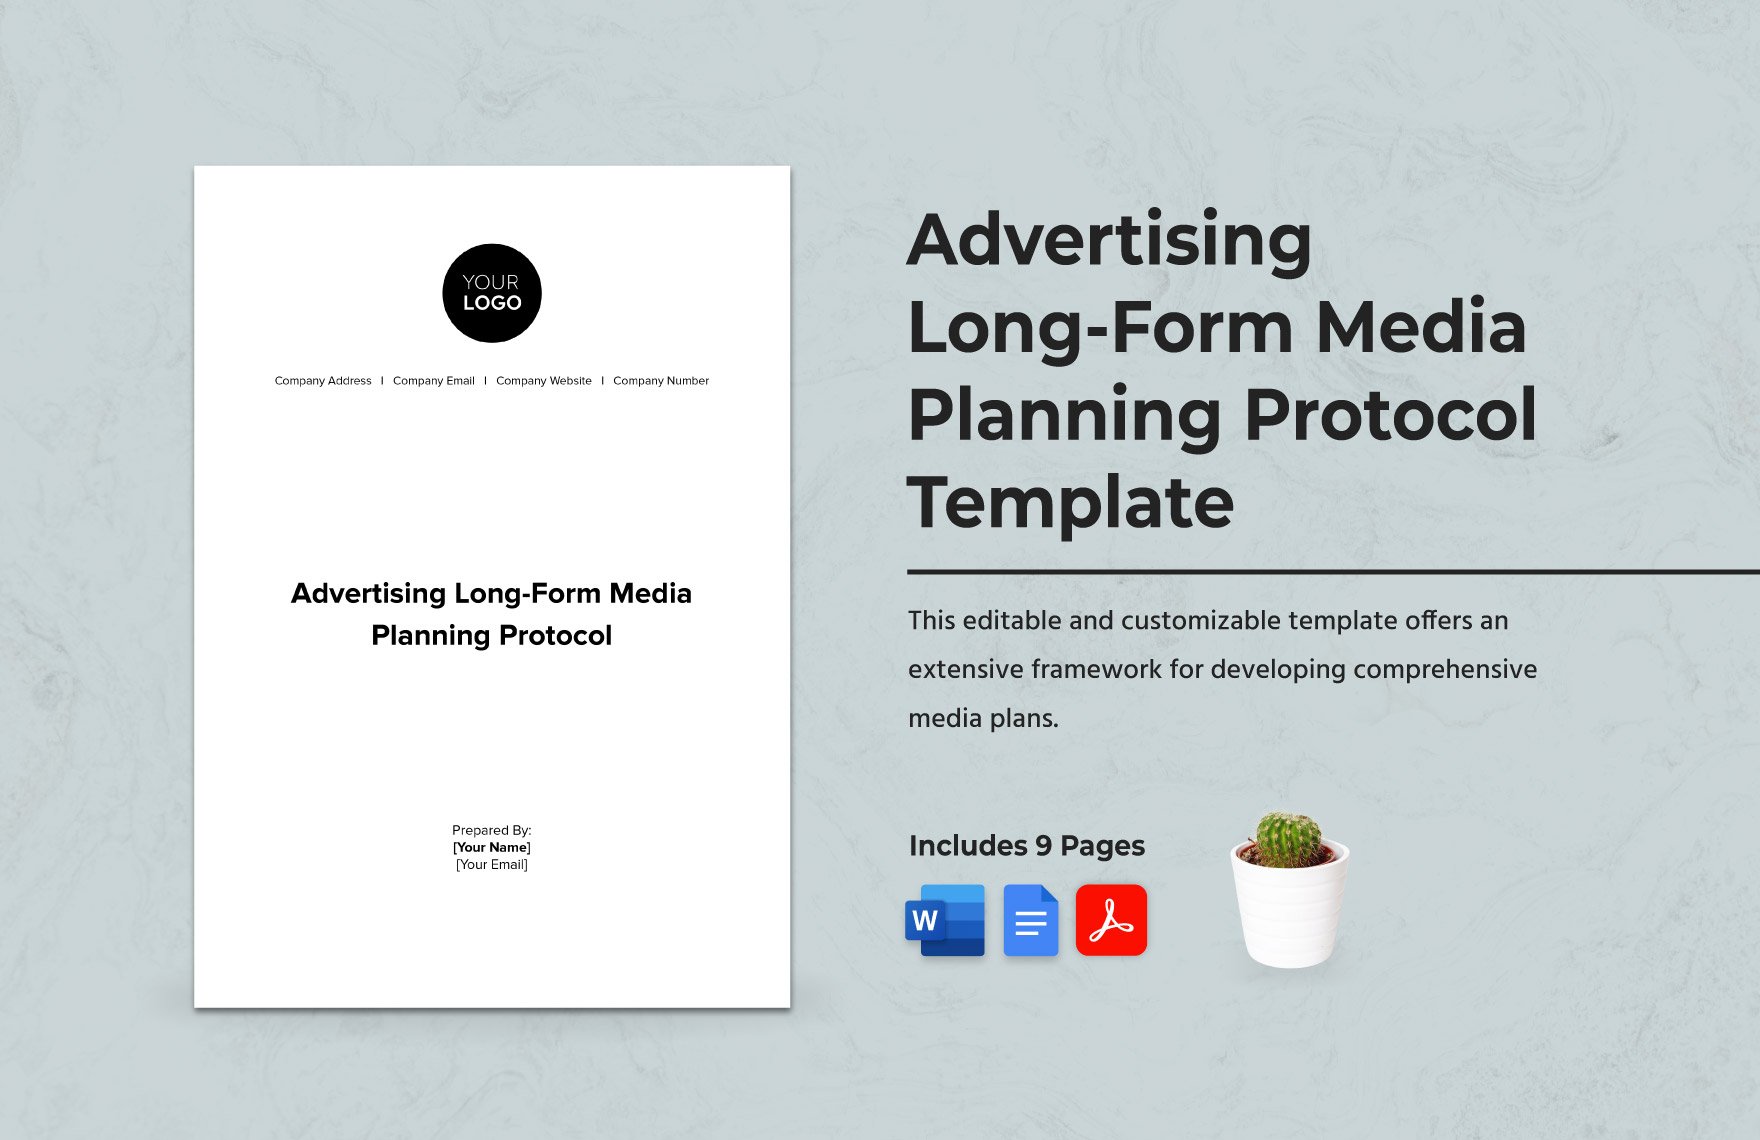 Advertising Long-Form Media Planning Protocol Template